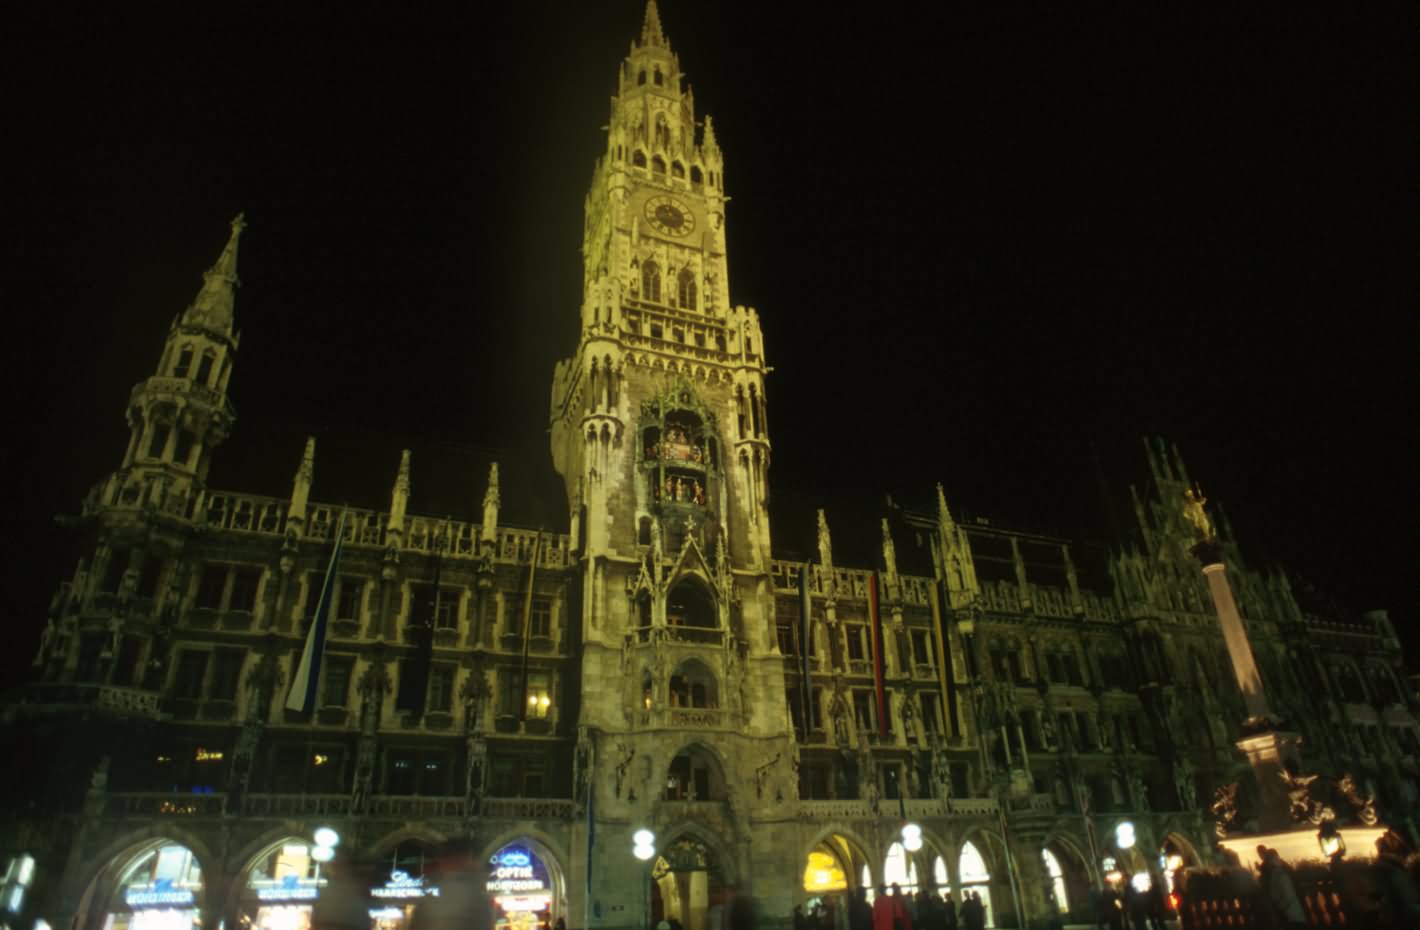 Night Picture Of The Neues Rathaus In Munich, Germany